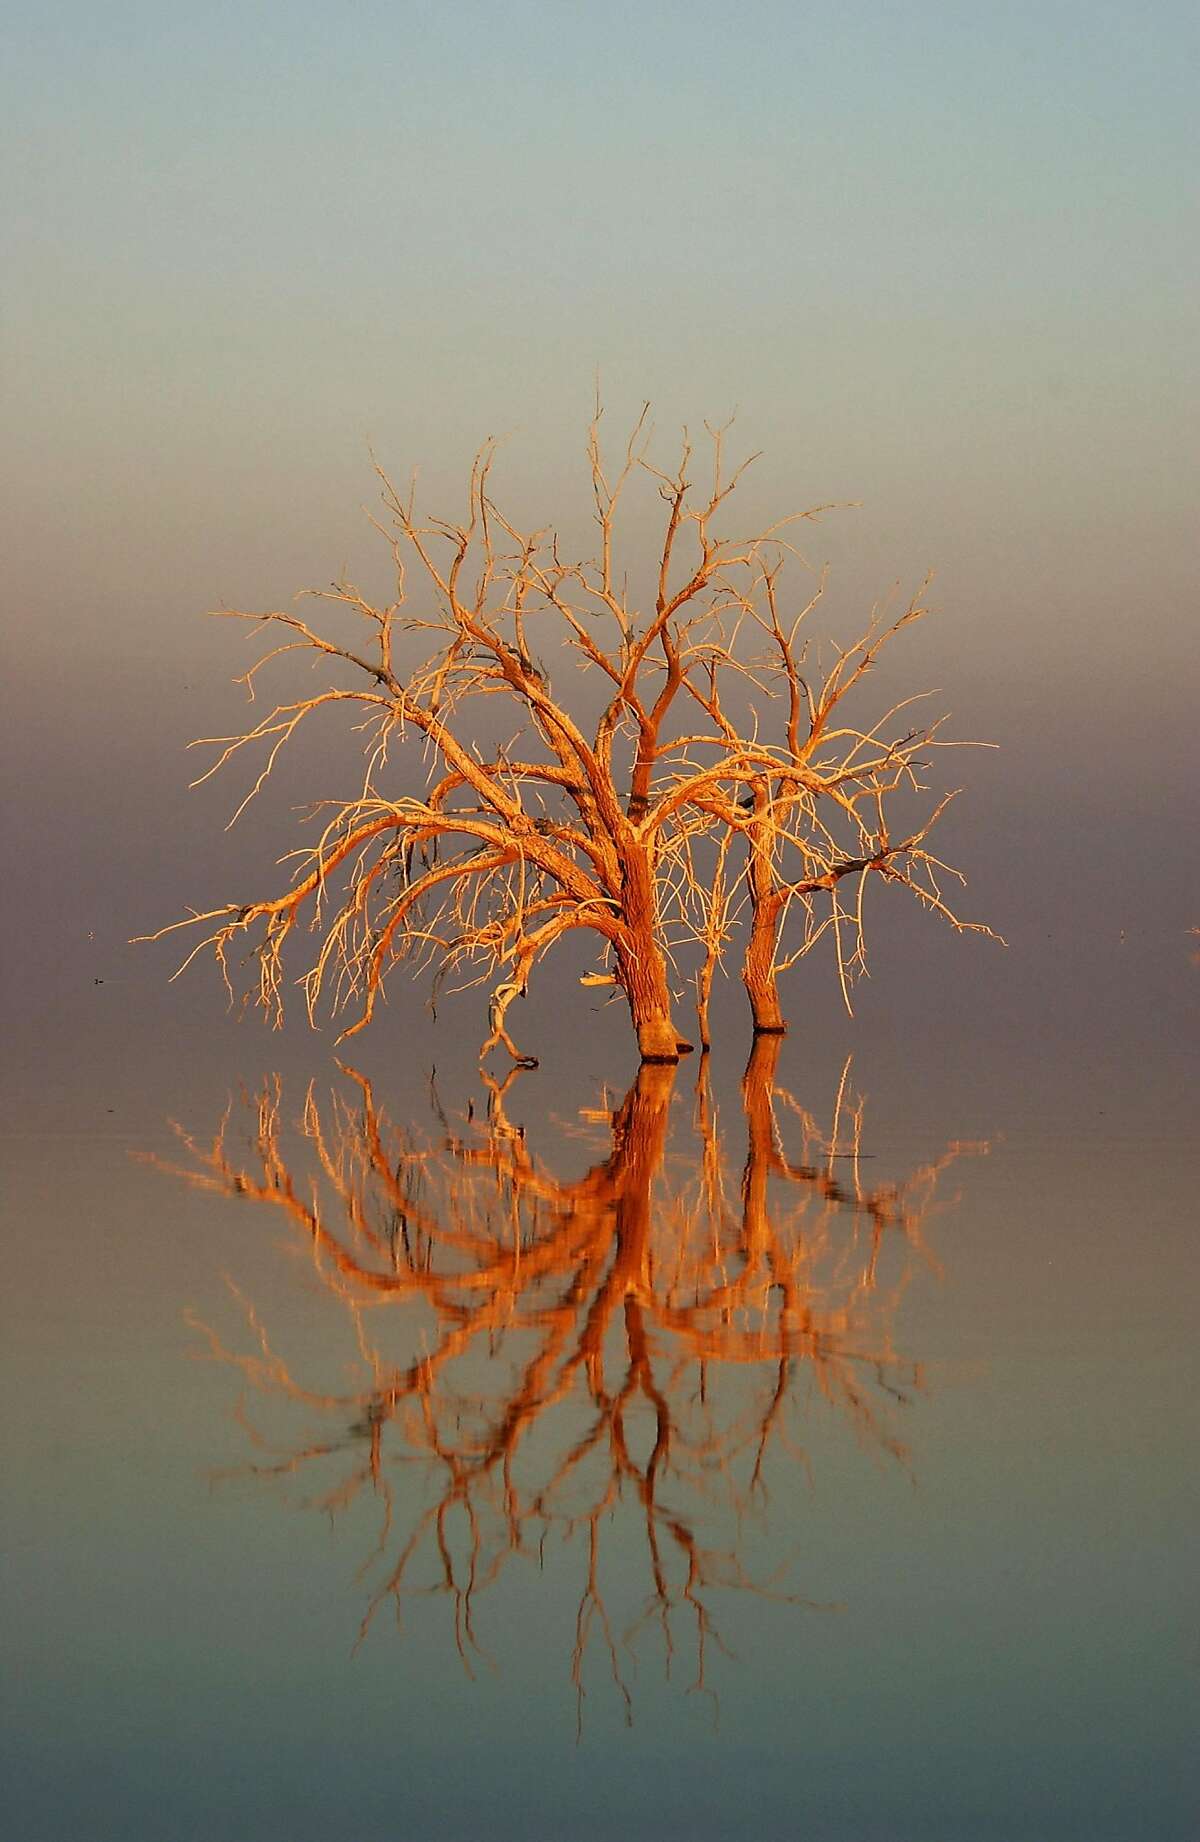 SALTON SEA, CA - JUNE 17: Trees flooded by the Salton Sea are illuminated by sunrise on June 17, 2003 in the Colorado Desert of southern California. The Salton Sea Authority is considering a plan to shrink the salty 376-square-mile lake by capturing and desalting agricultural runoff that flows into the sea from Imperial Valley farms in an effort to reduce salinity and make the body of water more habitable to fish and birds along the Pacific flyway. Farmers would then reuse the treated water, and more Colorado River water would be made available for Southern California cities, according to the Metropolitan Water District. The Salton Sea area has long been entrenched in California's water wars and is one a major stop for migrating birds. (Photo by David McNew/Getty Images)